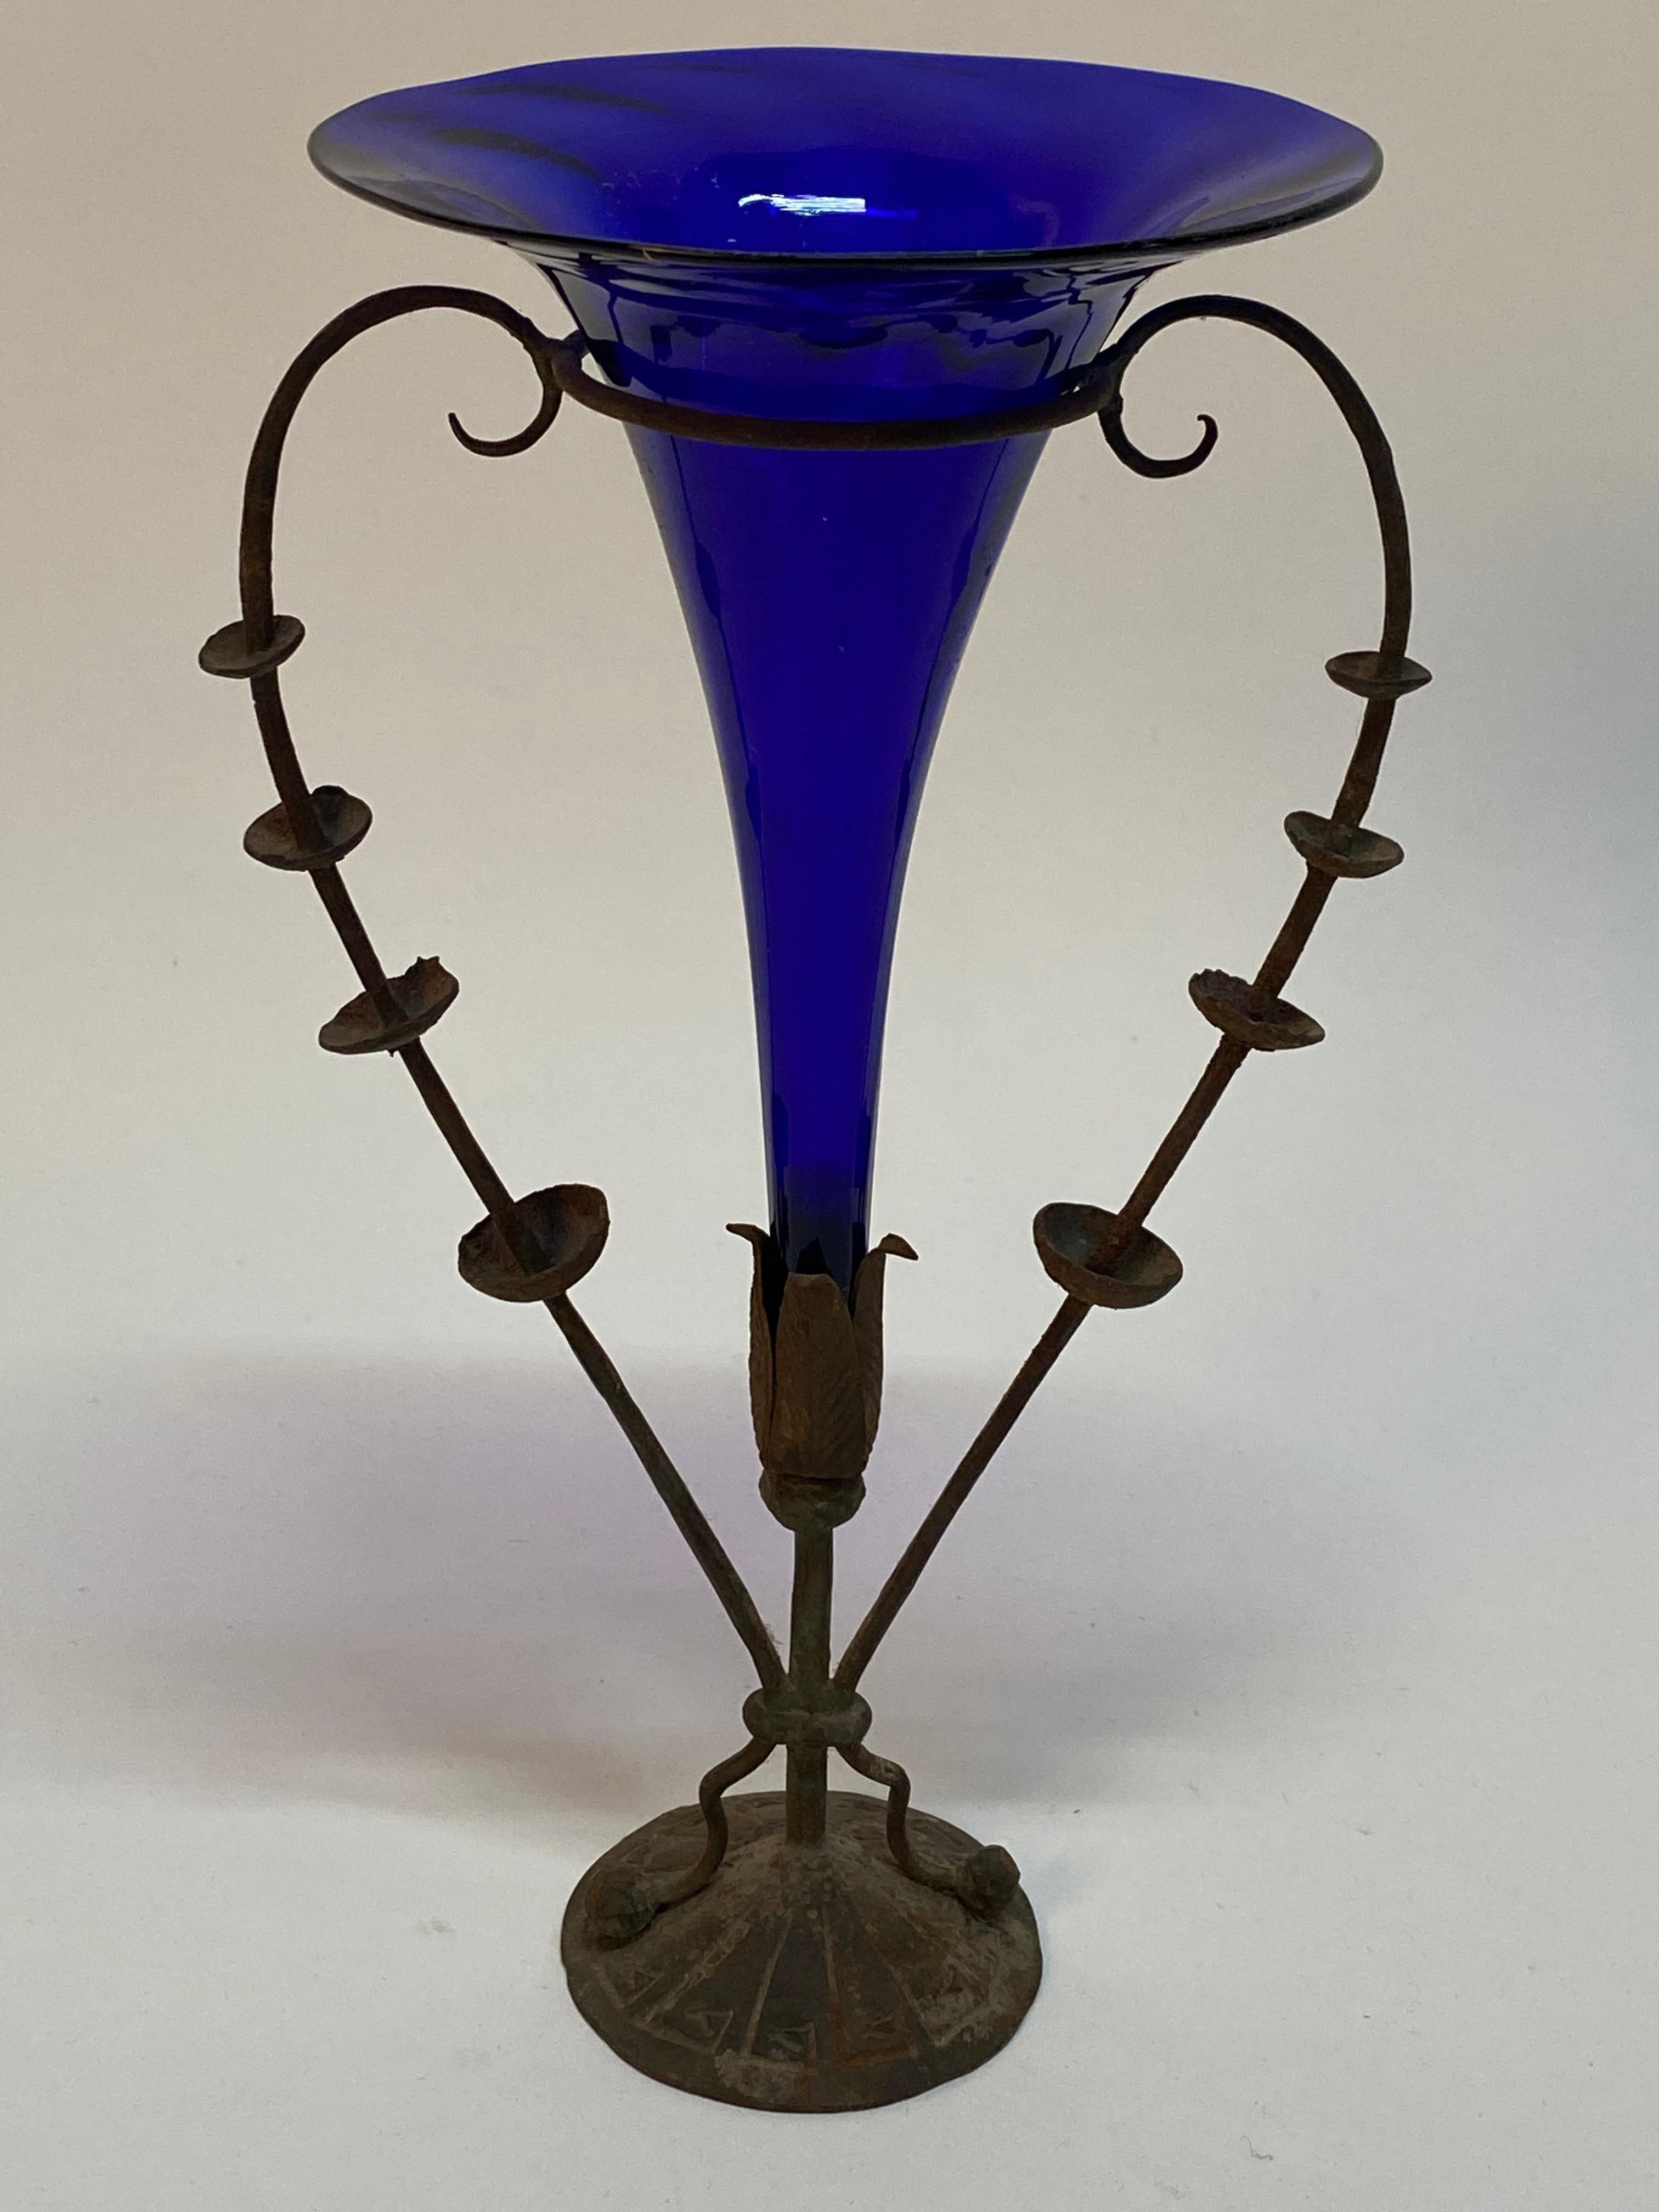 Elegant blown cobalt glass trumpet with a floral iron base. Circa 1920. This form borders on a very late Art Nouveau design, which precedes Zecchin's more modern forms of the late 1940s-1950s. 

Good overall condition with some cosmetic wear, light